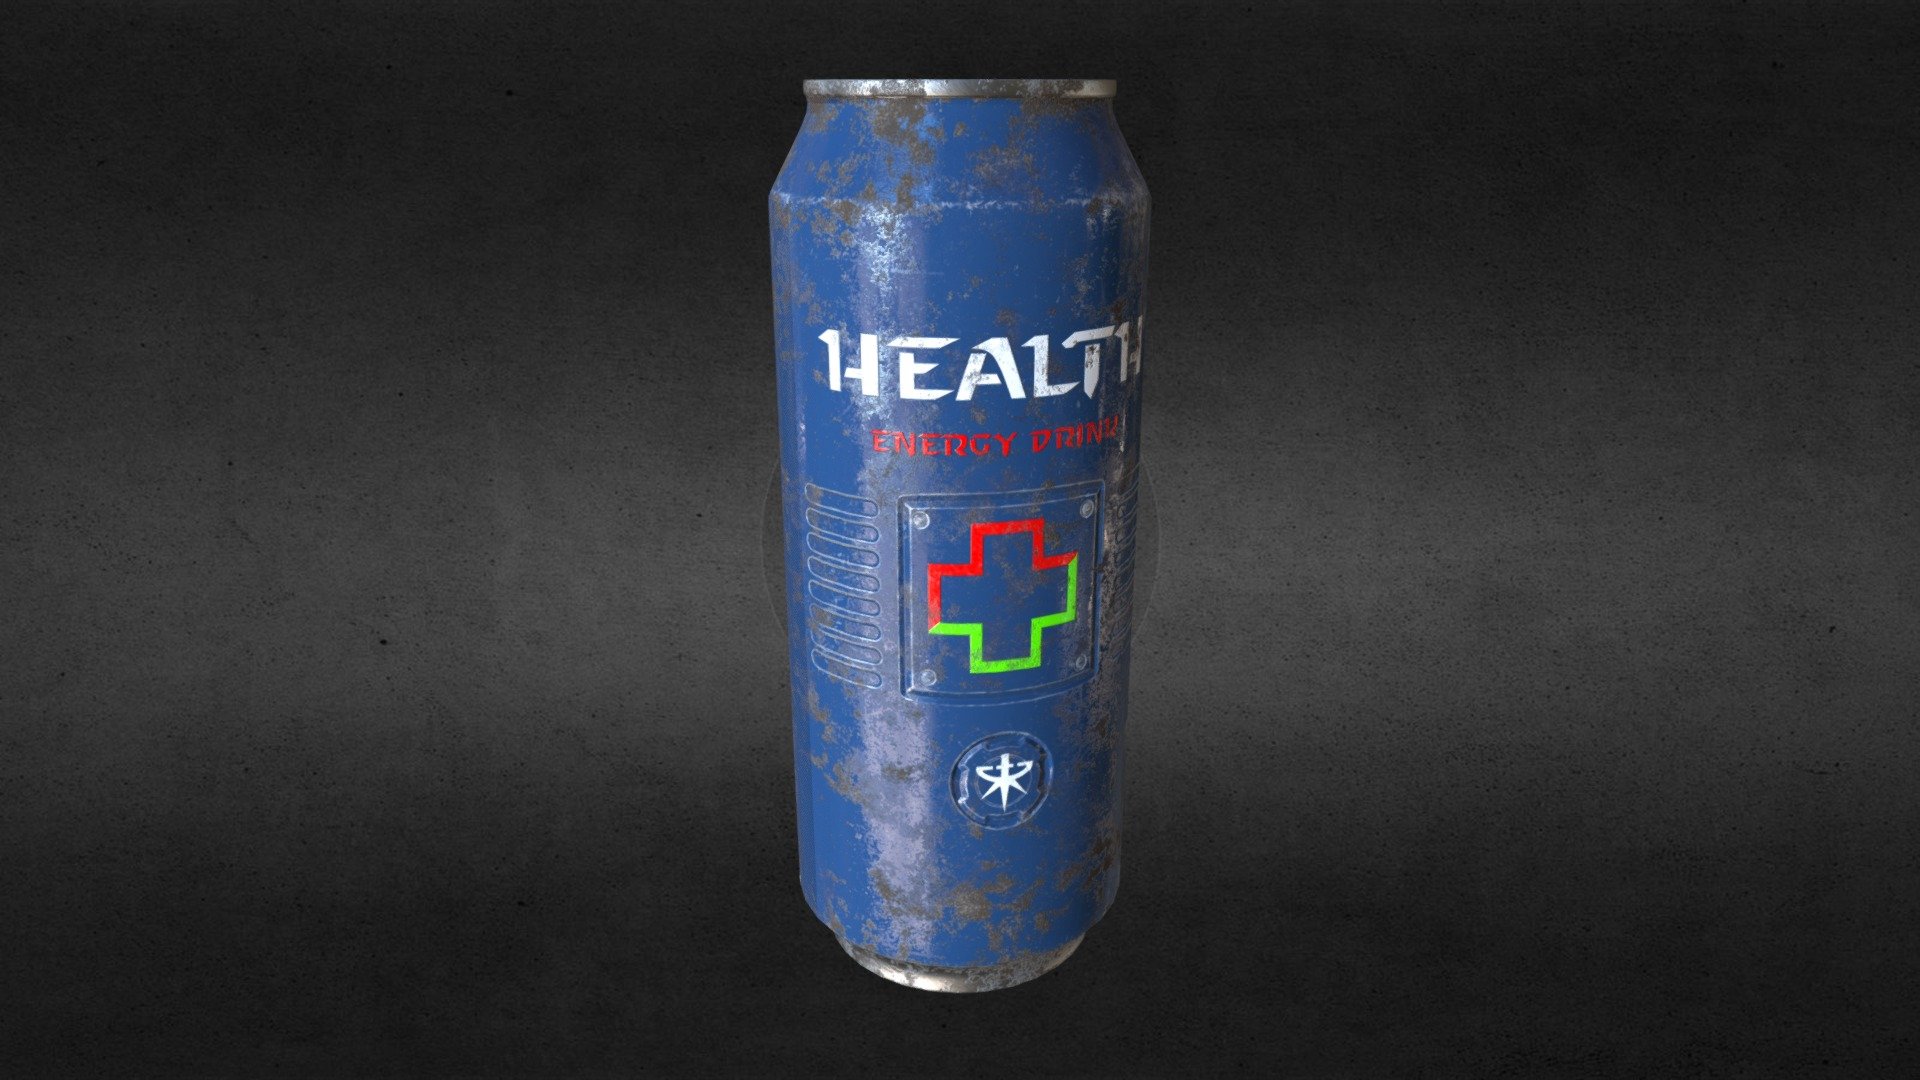 This project was done for sketchfab texturing challange. Inspiration was taken from Starcraft Terrans. I wanted to create a can for energy drink for colonial Marines. It is only distributed among Raynors Raiders faction. Hope you like it, and of course c&amp;c are welcome :)

Credits for the model goes to the dark-minaz, thanks for the model! - Energy drink - 3D model by autentikum 3d model